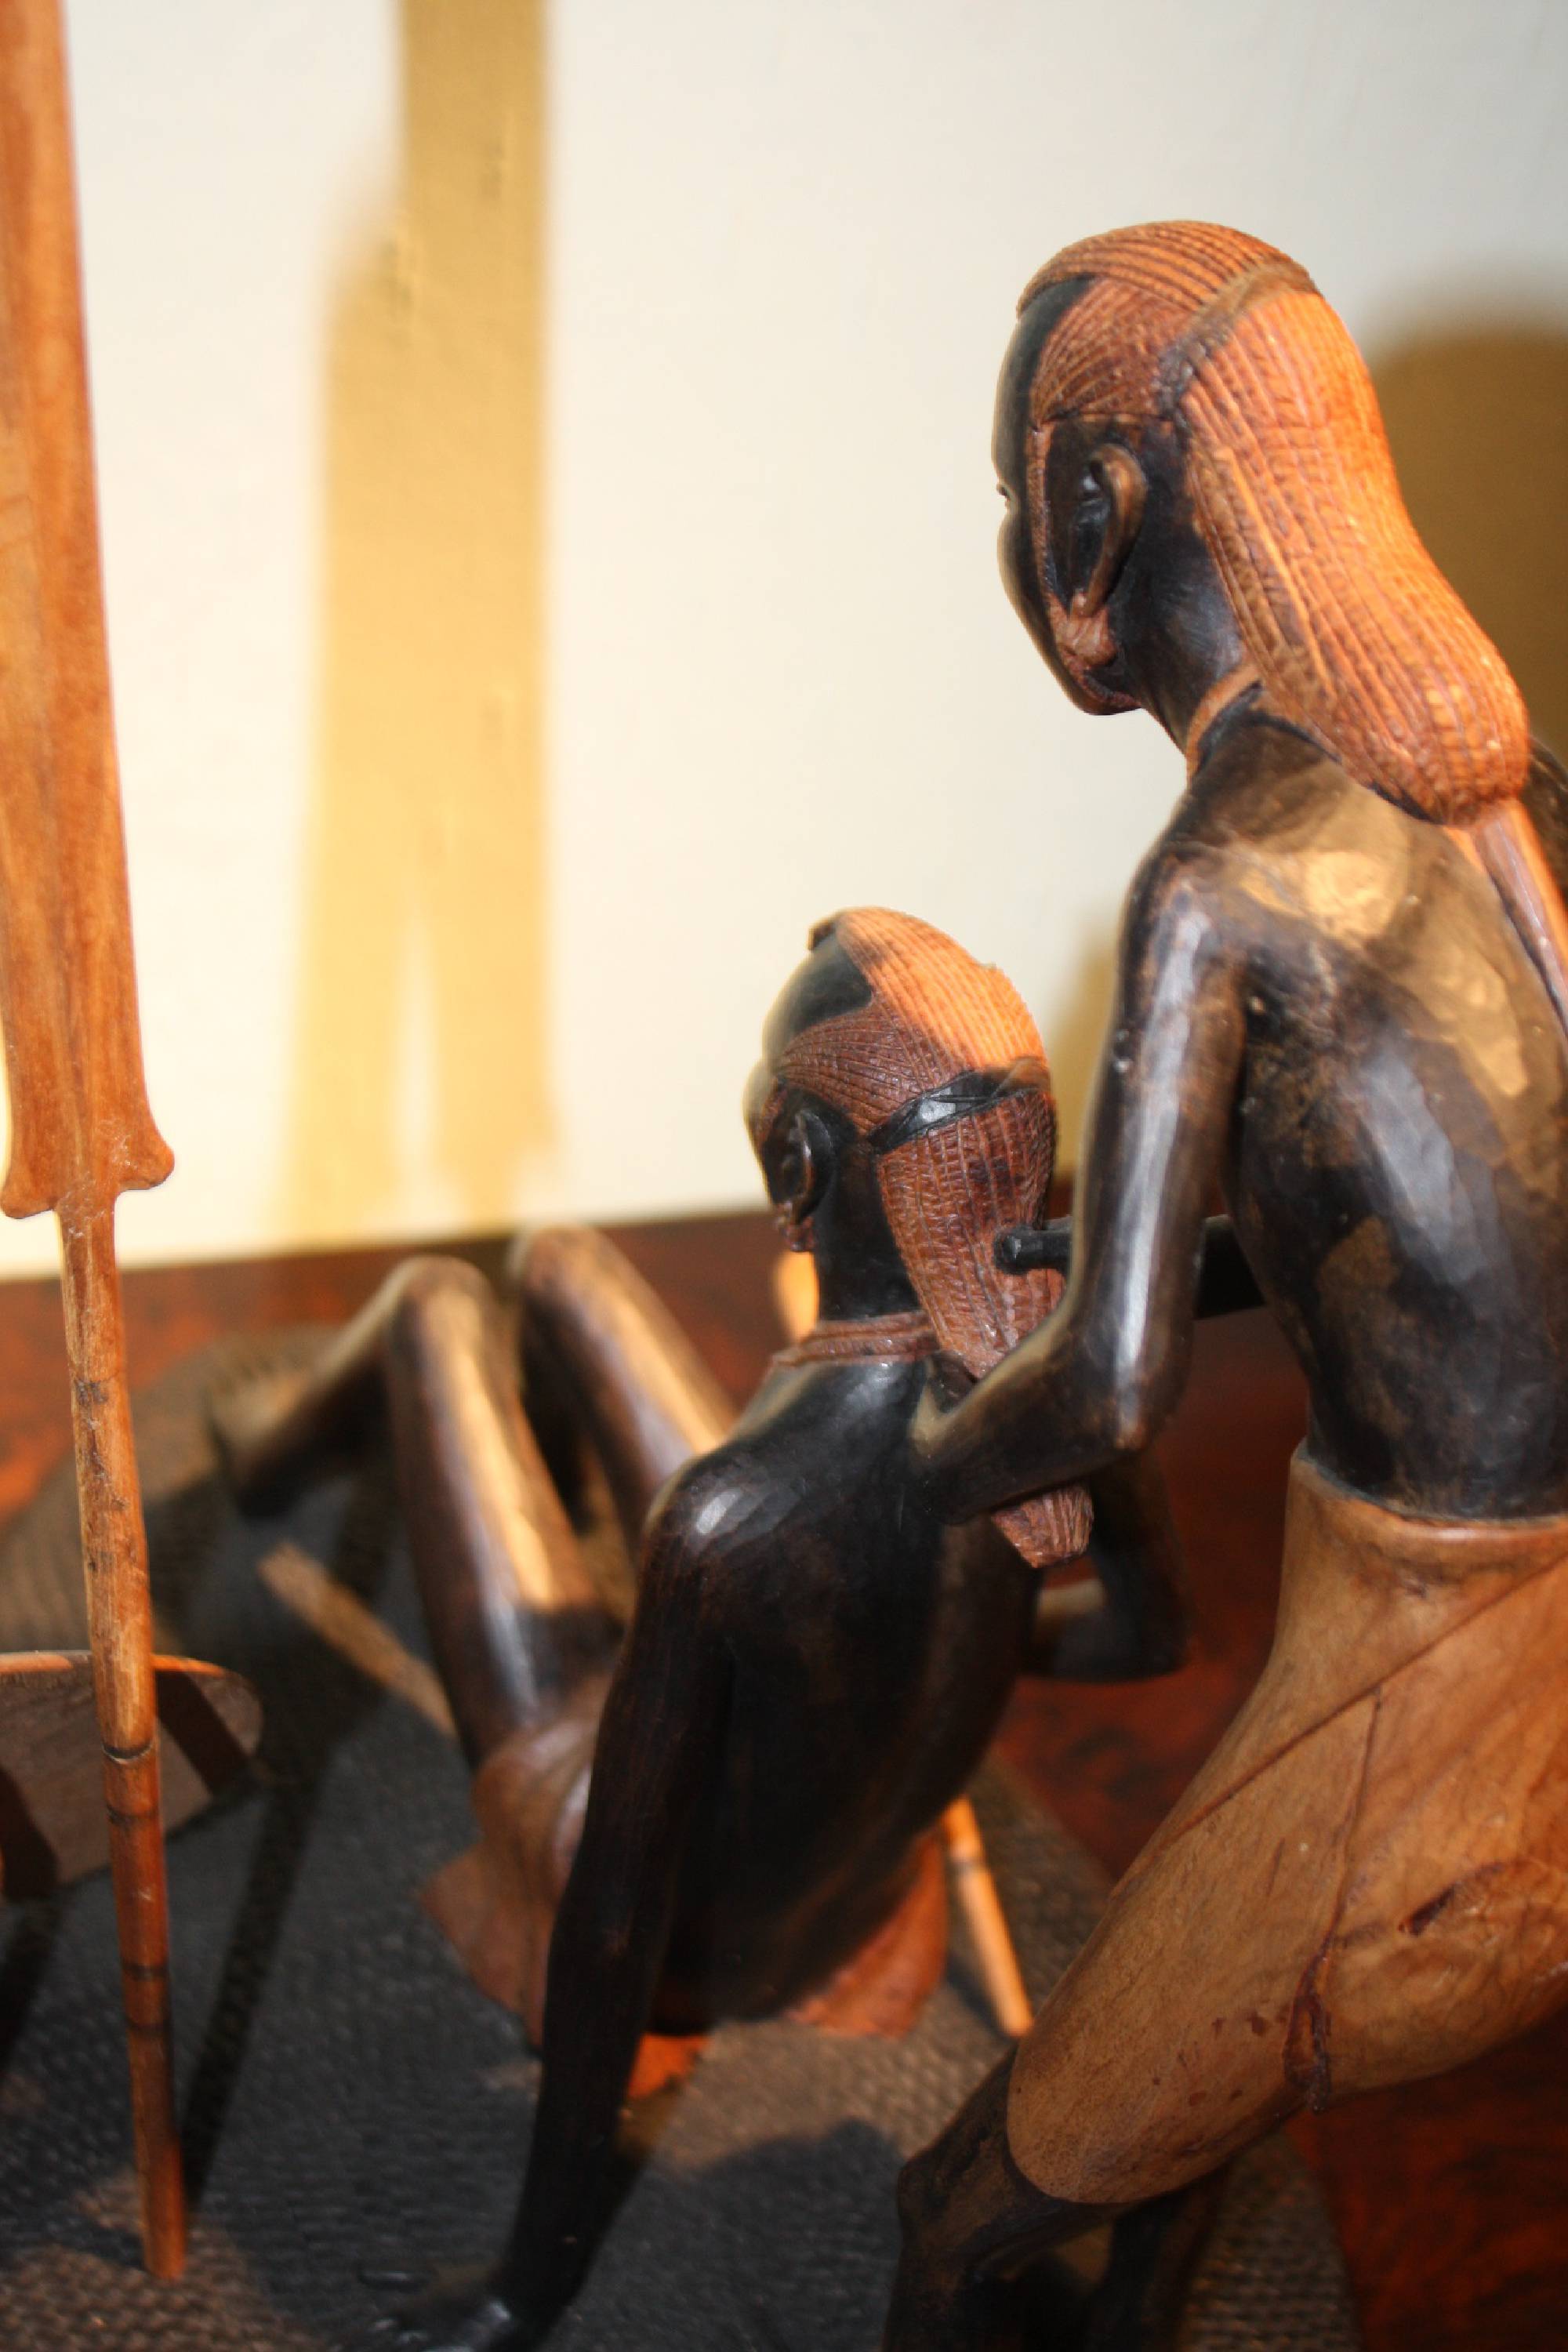 East-African handcarved wooden tribal Massai sculpture showing two hunters